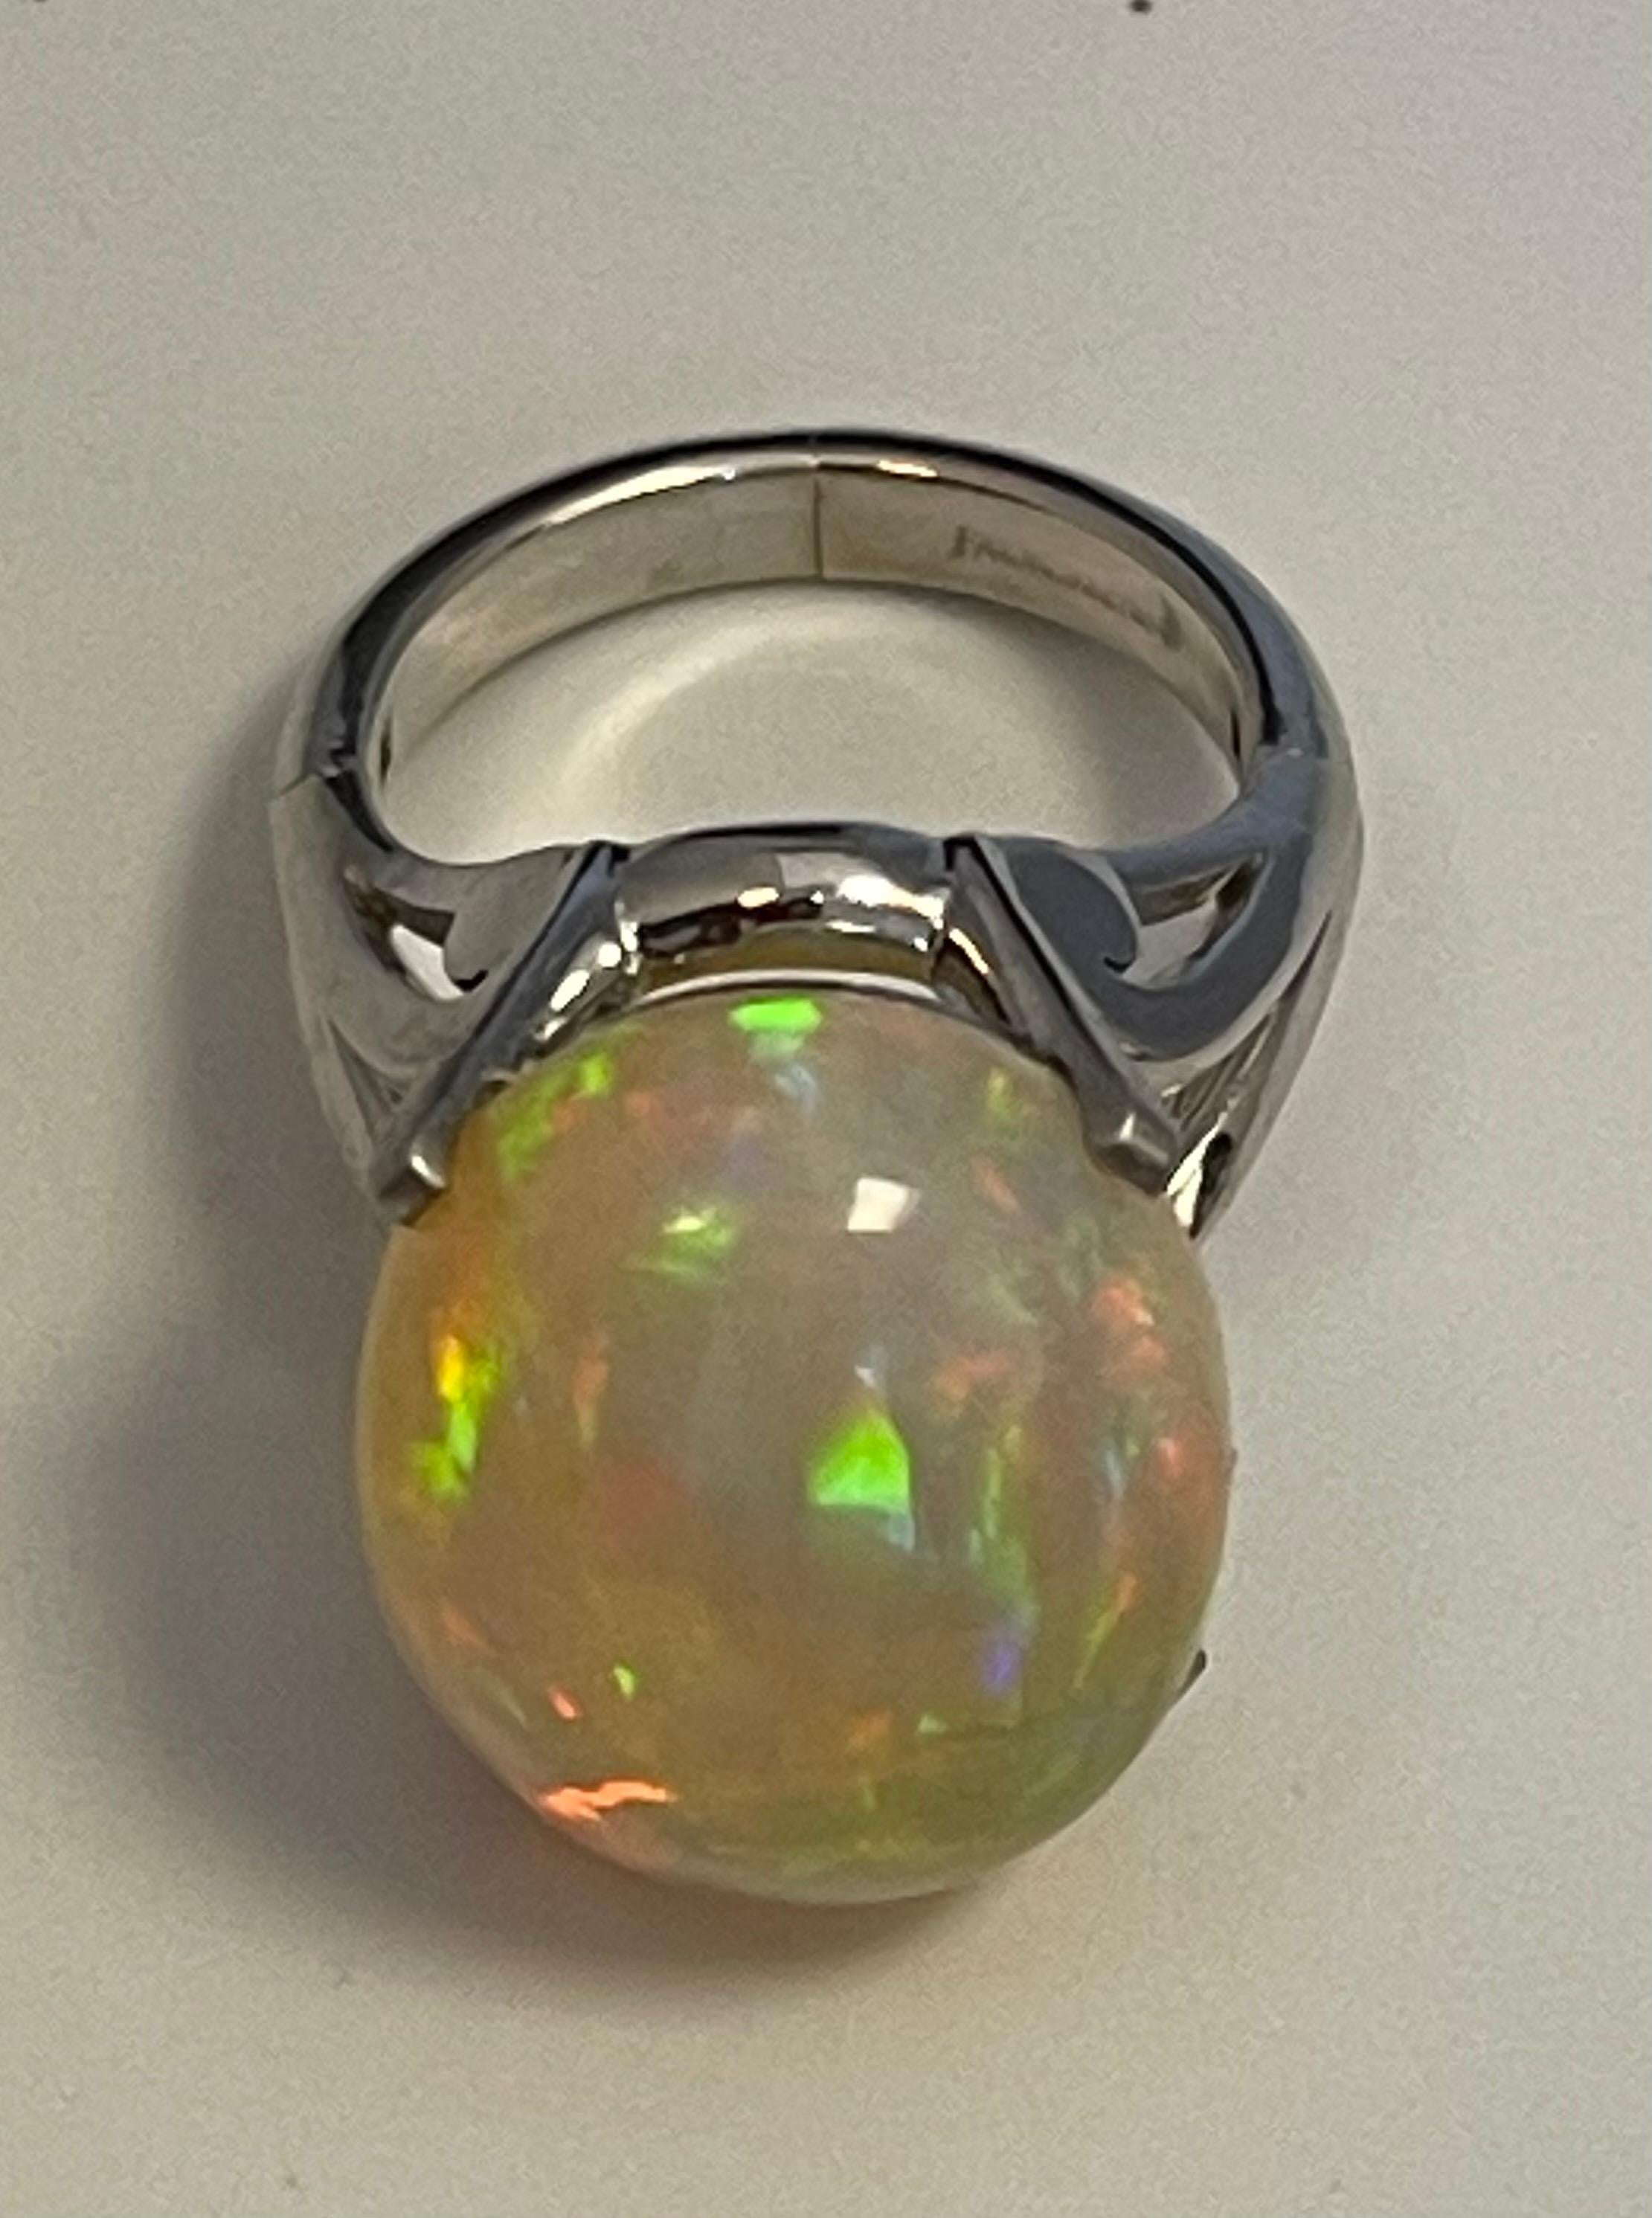 14 Carat Oval Shape Ethiopian Opal Cocktail Ring in Platinum In Excellent Condition For Sale In New York, NY